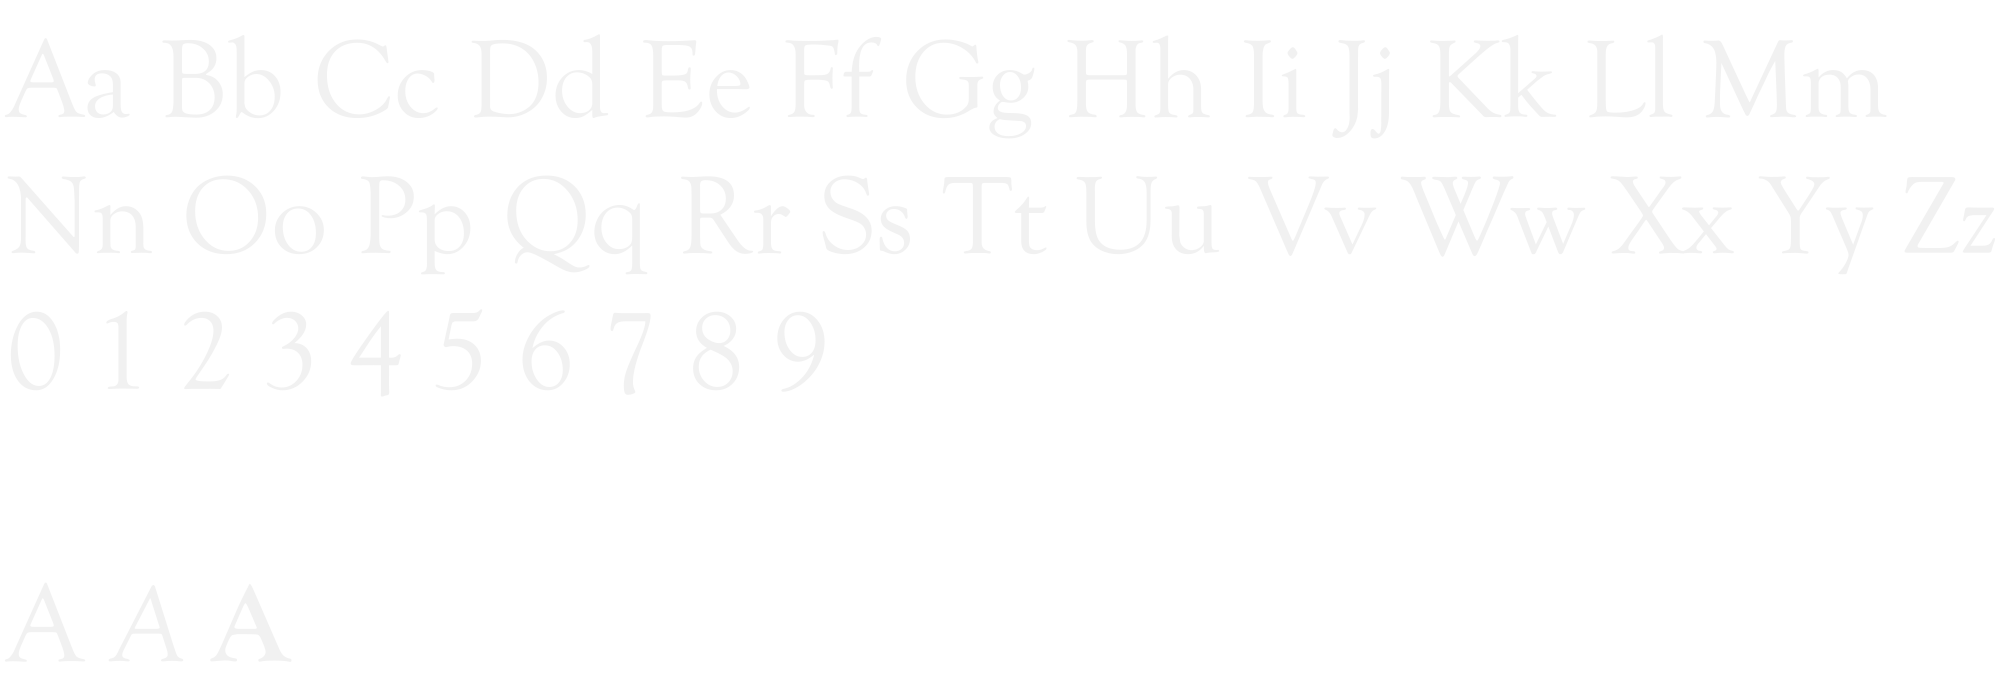 Goudy Old Style Typeface